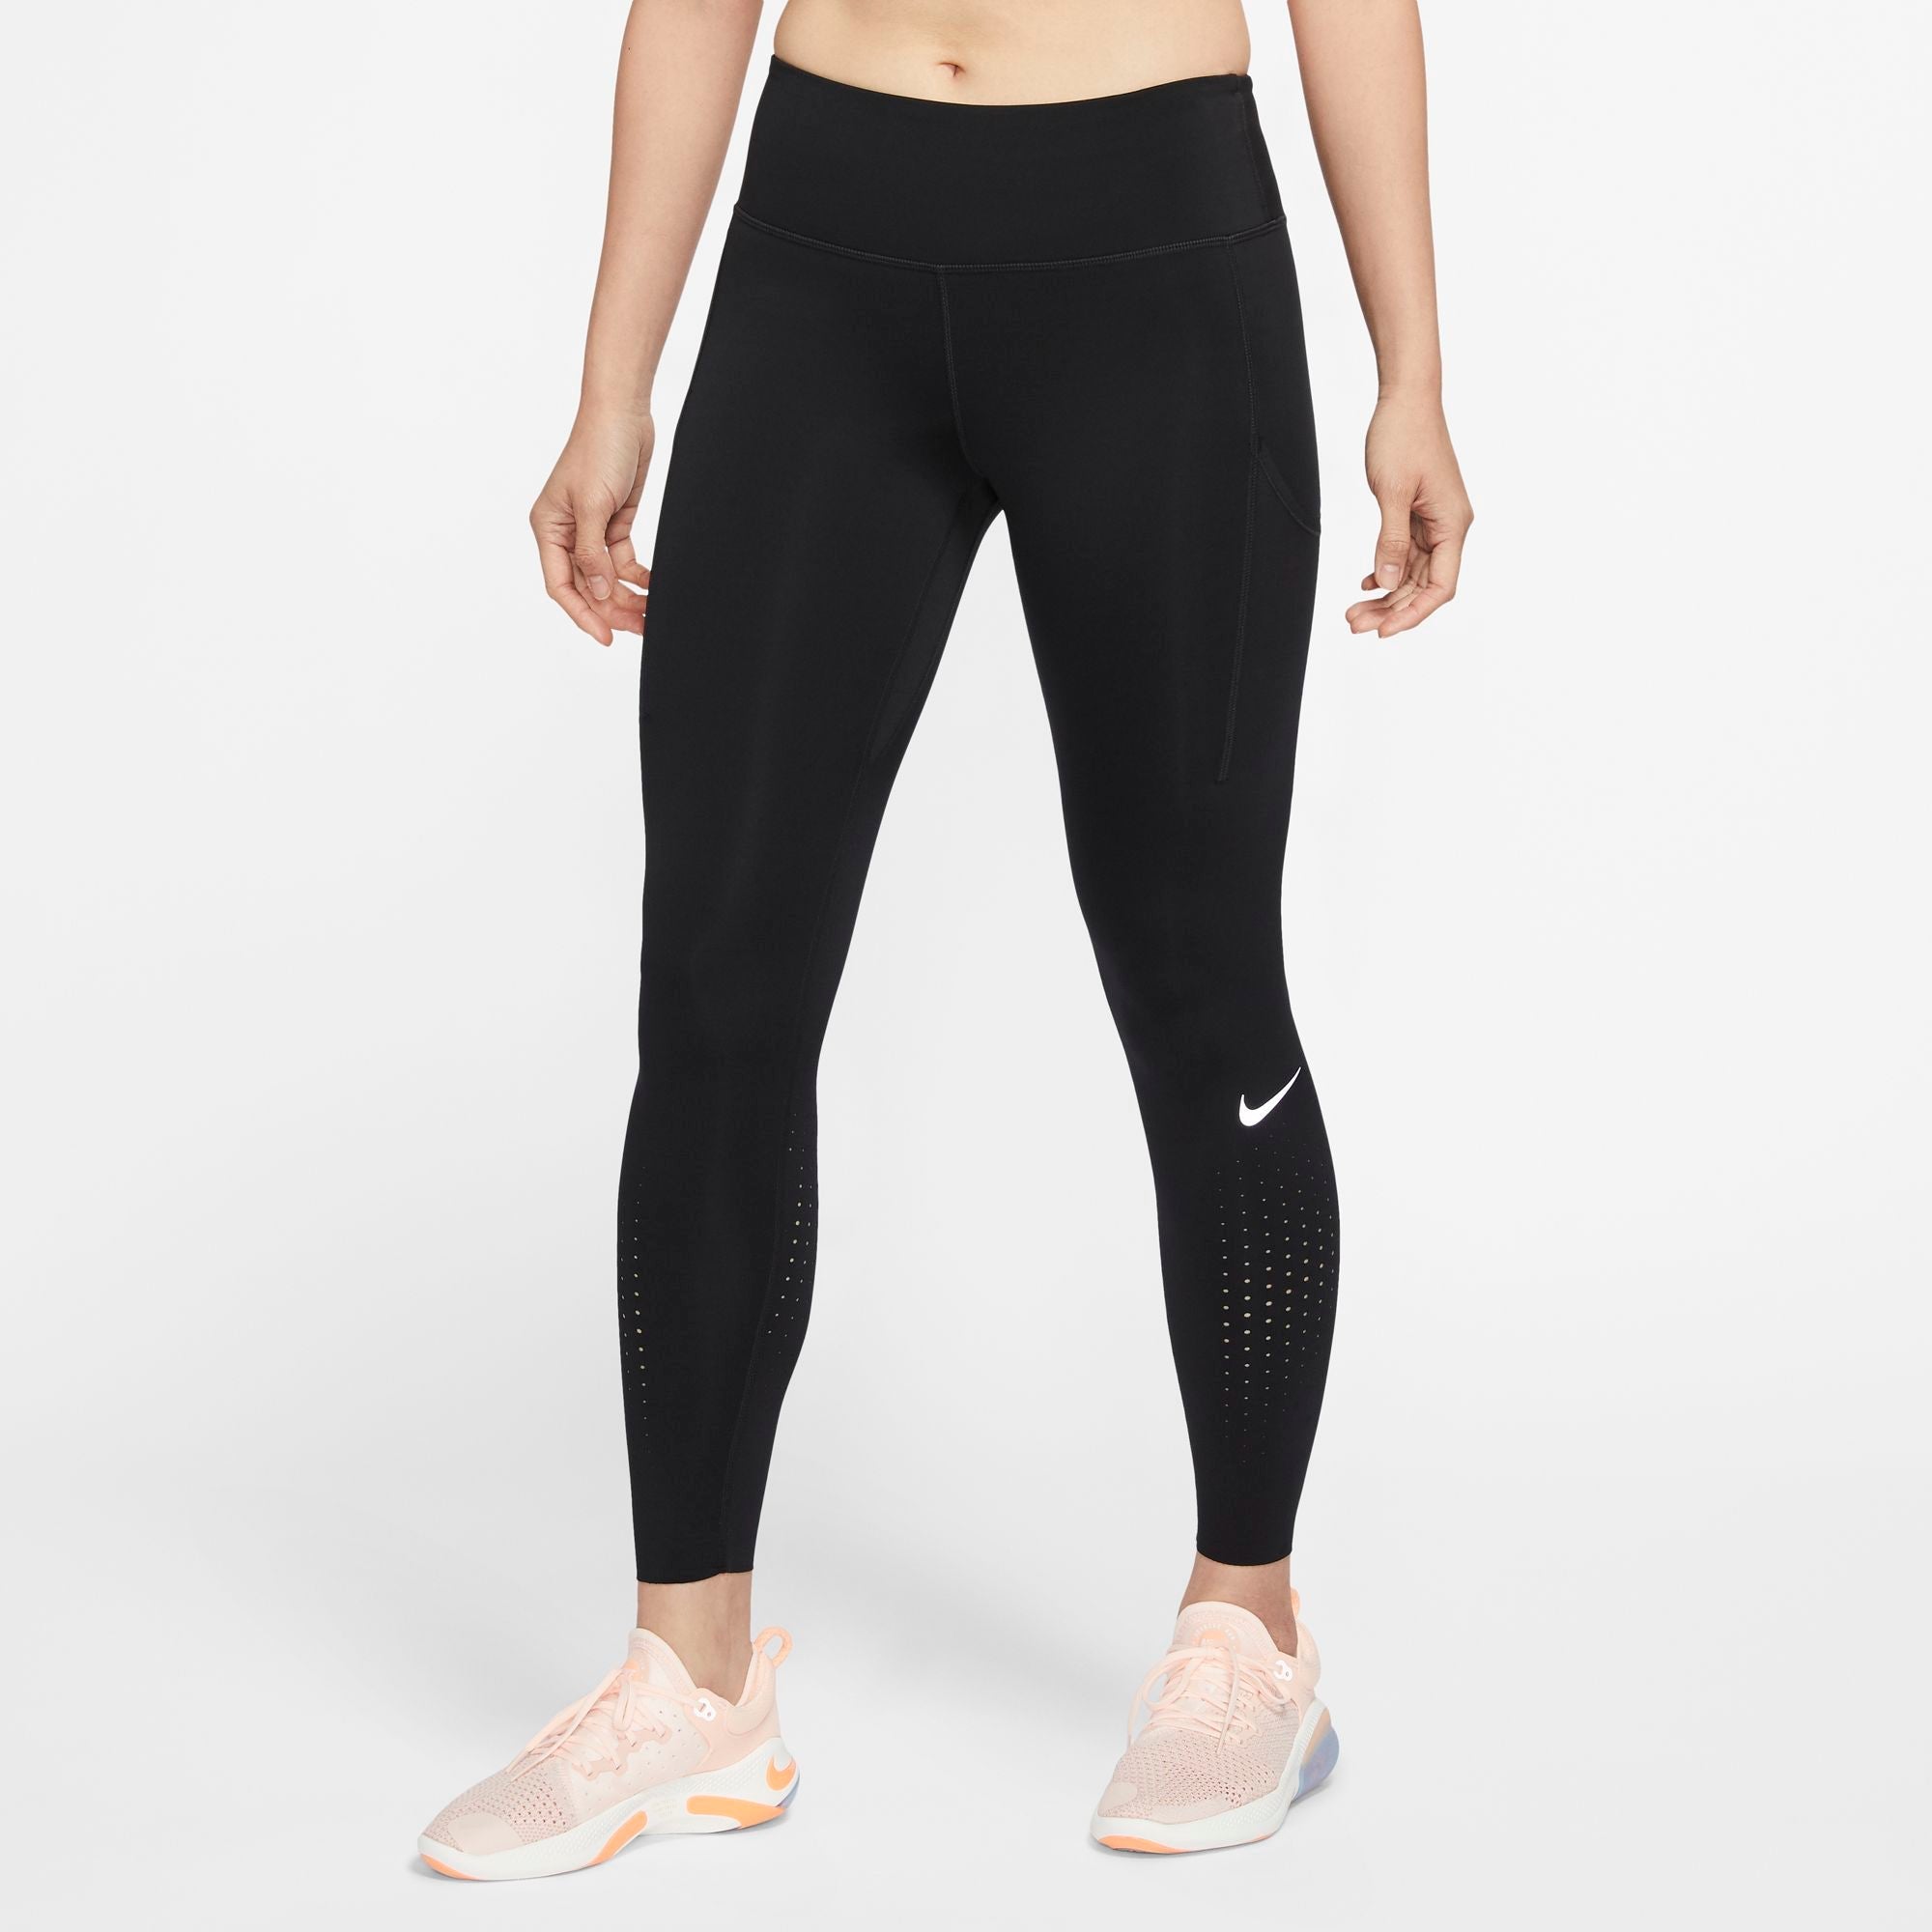 Nike Epic Luxe Tights Womens APPAREL - Womens Tights BLACK/REFLECTIVE SILVER